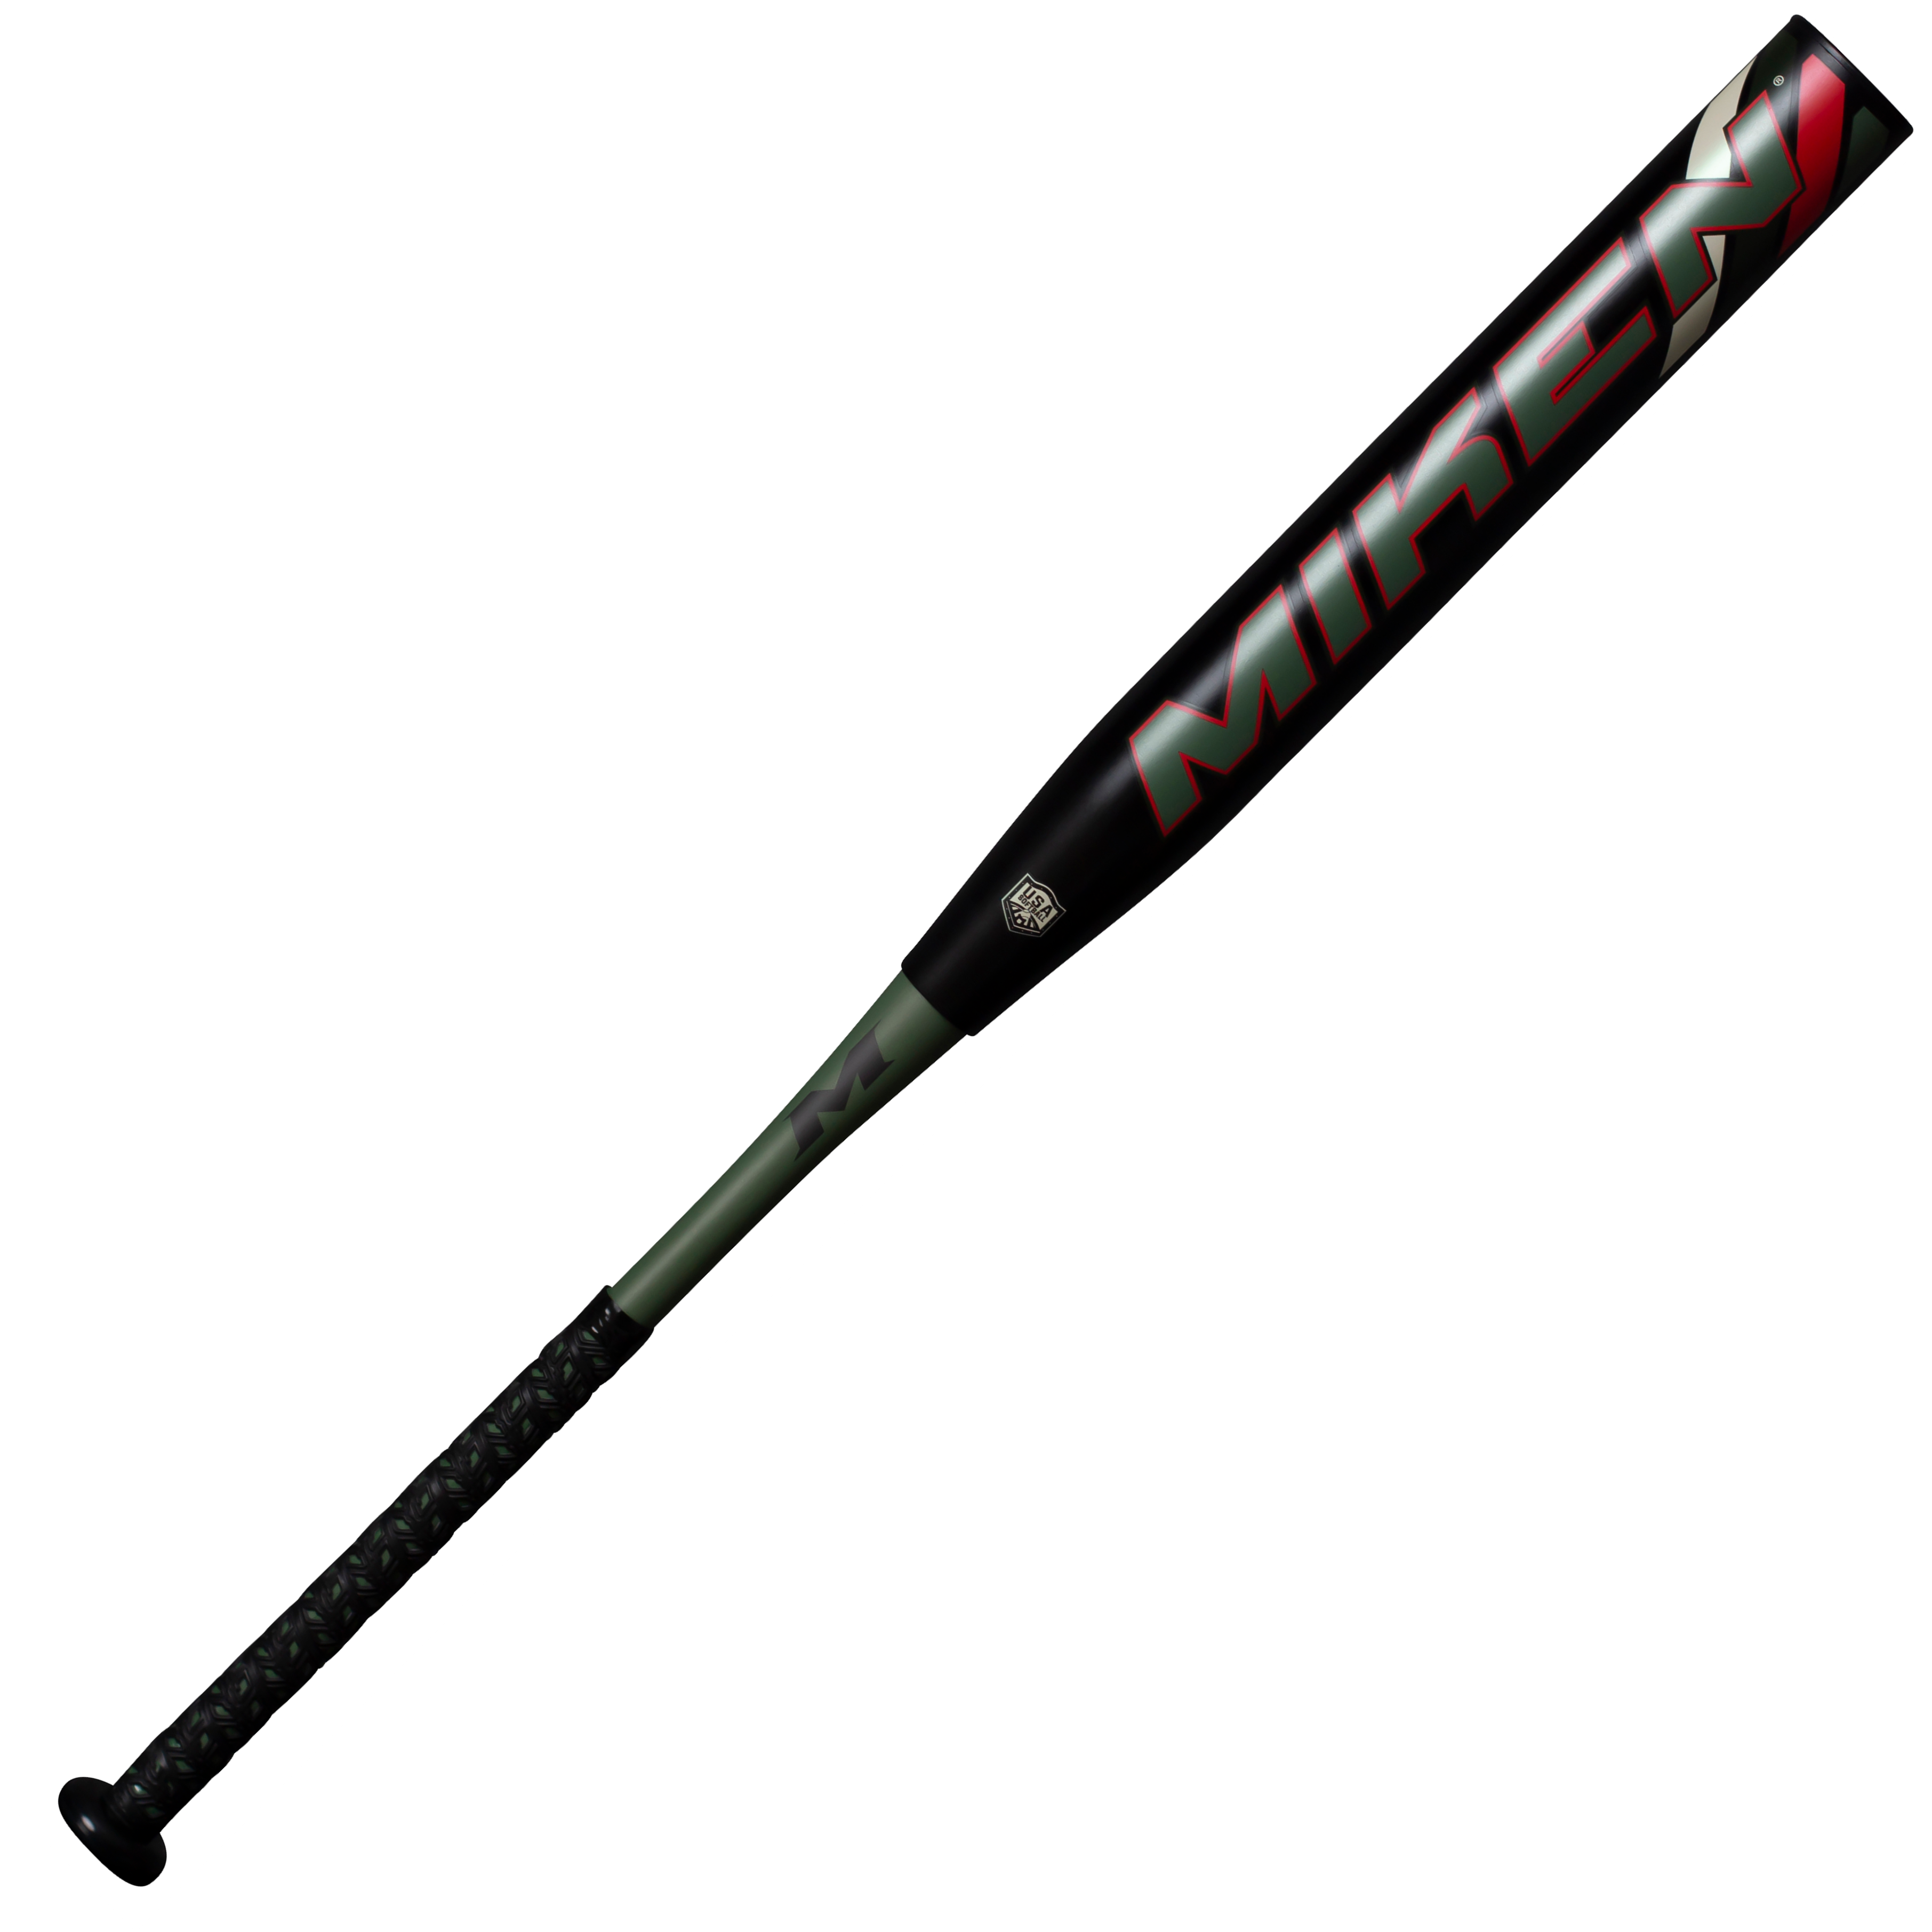 The ASA 2020 Limited Edition Miken DC-41 Slow Pitch Softball Bat (MDC20A) features the standard 2 1/4-inch barrel diameter, an extra long 14-inch barrel length, and a SuperMax one-ounce end load that is recommended for power hitters. The Limited Edition DC-41 is specifically designed to crush lower compression, 52 COR softballs in ASA approved leagues and tournaments.    Size:   2 1/4 in  Certification:   USA  Frame:   Two-Piece  Technology:   Triple Matrix Core +, F2P, 100 COMP  Series:   DC-41  Warranty:   1 Year  Barrel Length:   14 in  Year Released:   2020   